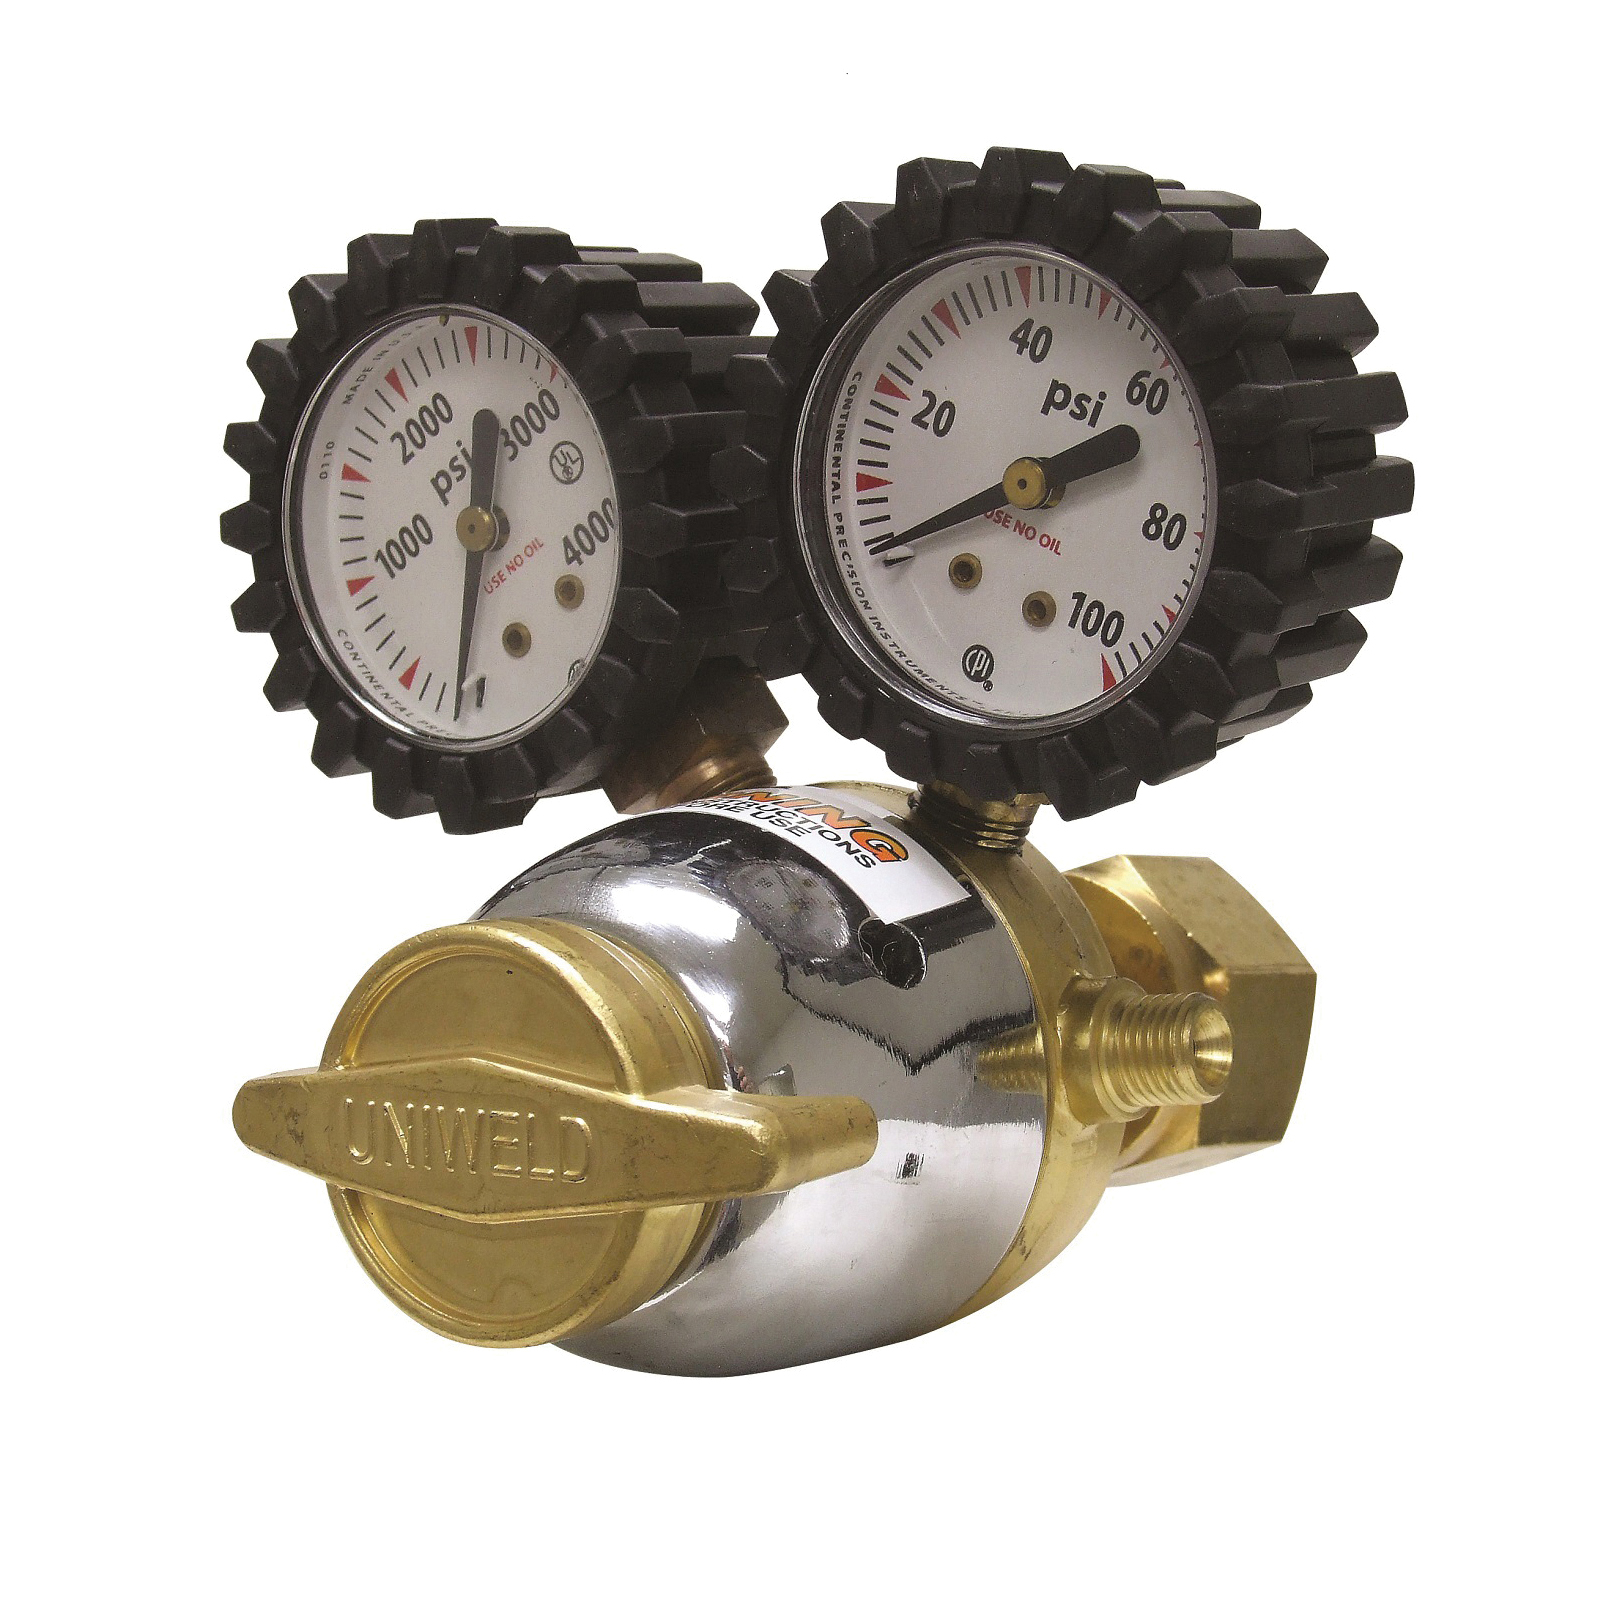 UNIWELD® R Series RMC Regulator, Acetylene Gas, 1 -Stage, 3/8-14 Inlet Connection, 3/8-24 Outlet Connection